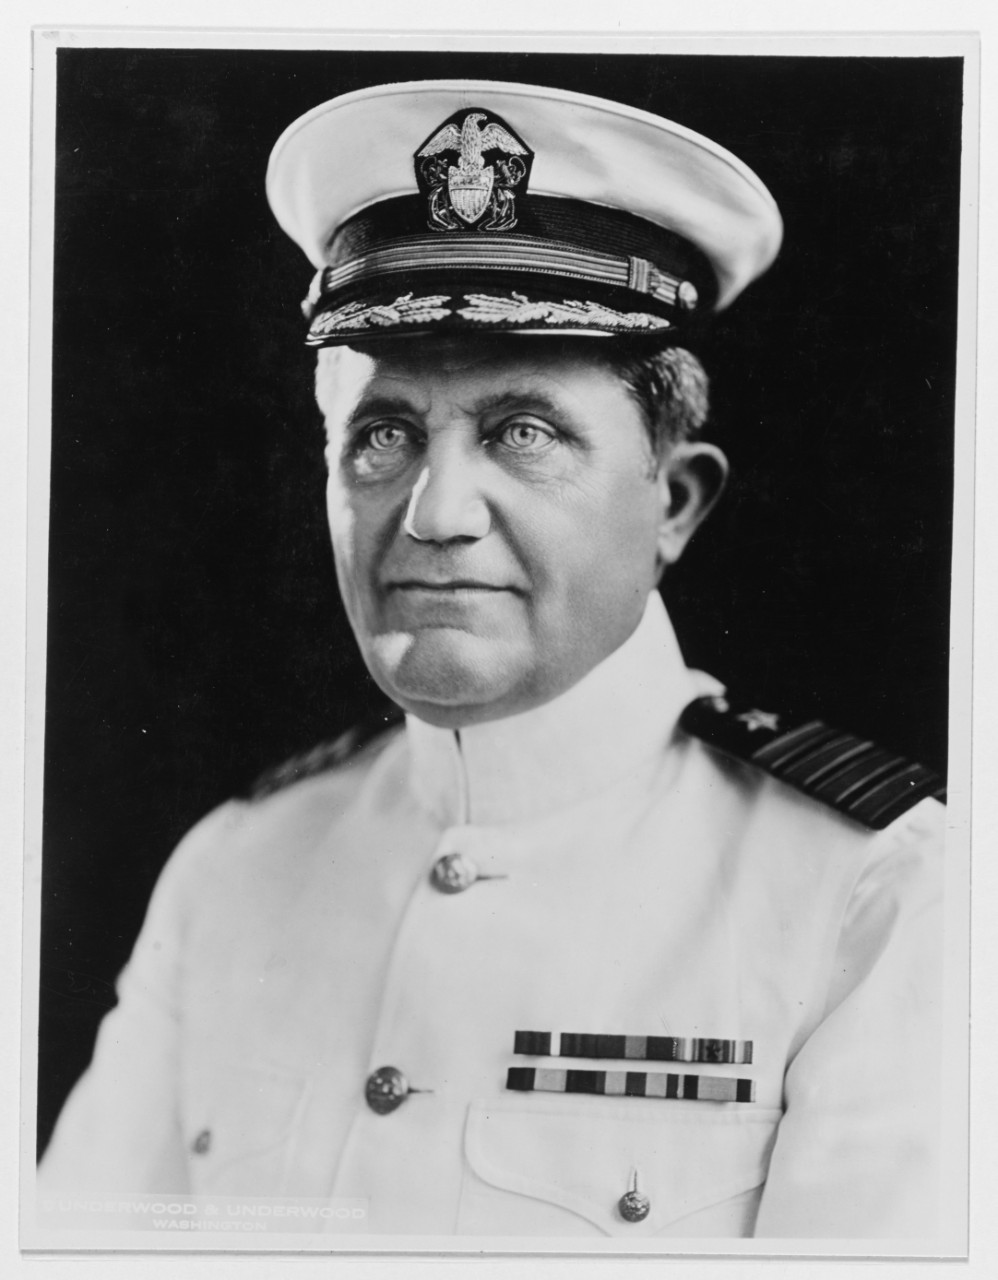 Captain Luther M. Overstreet, USN